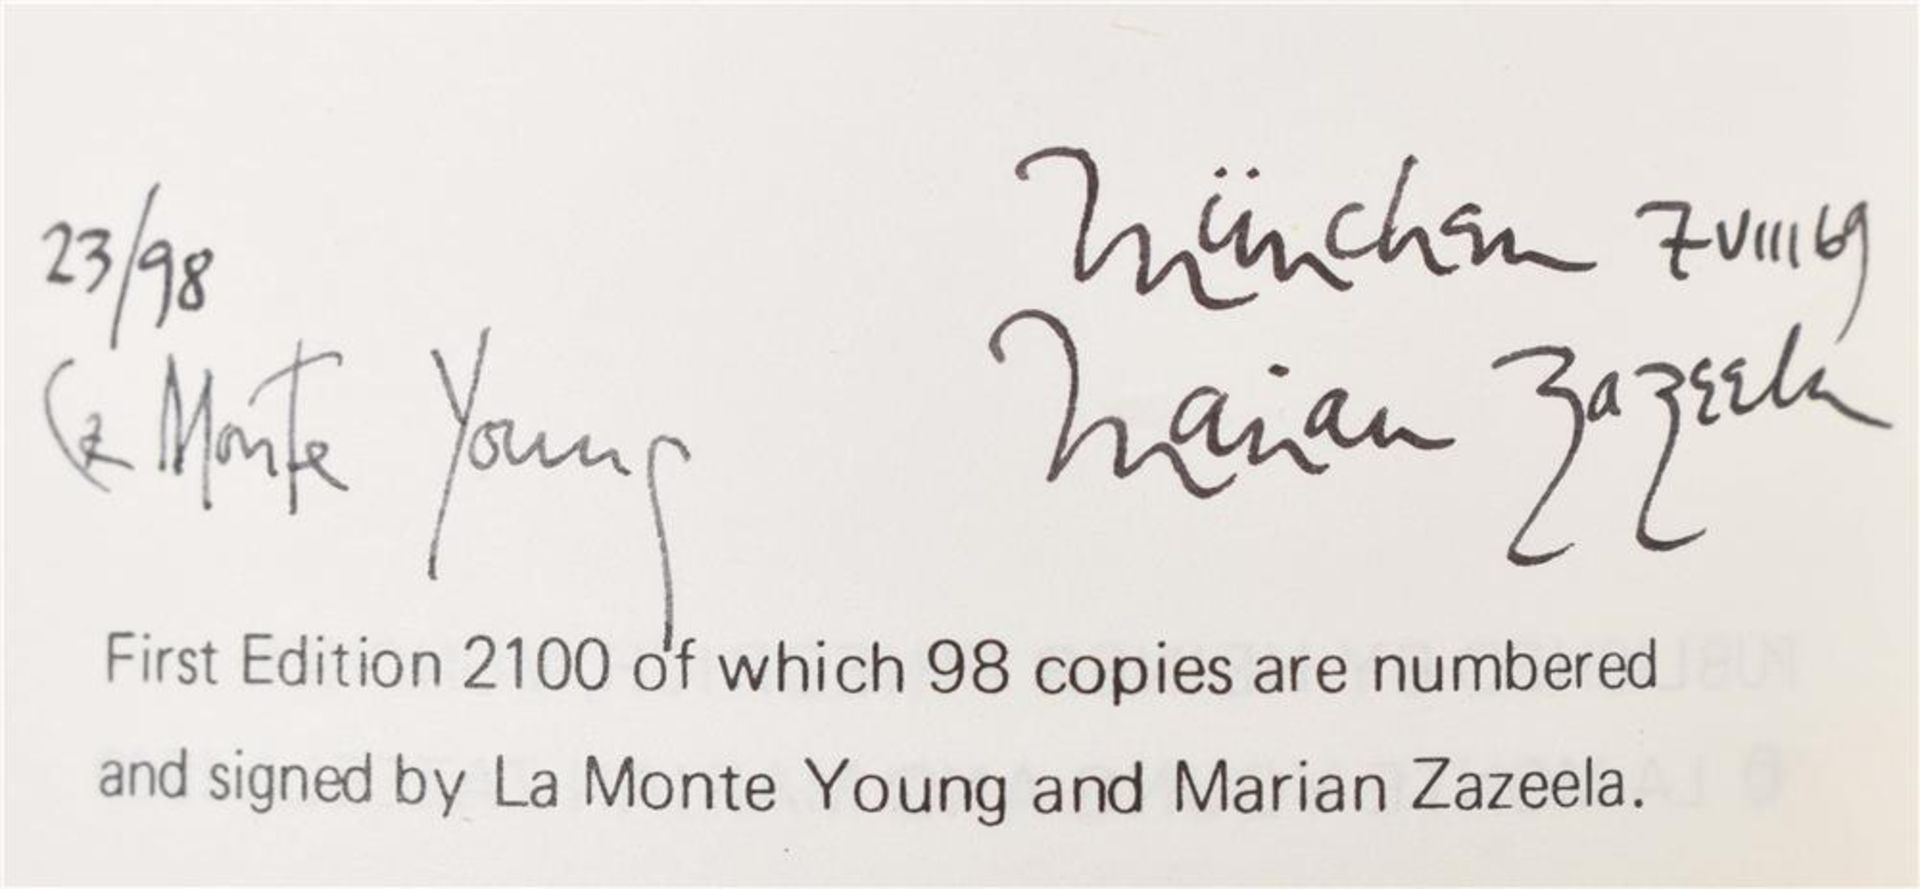 La Monte Young and Marian Zazeela, Selected Writings. Signed and numbered first edition, rare - Image 2 of 6